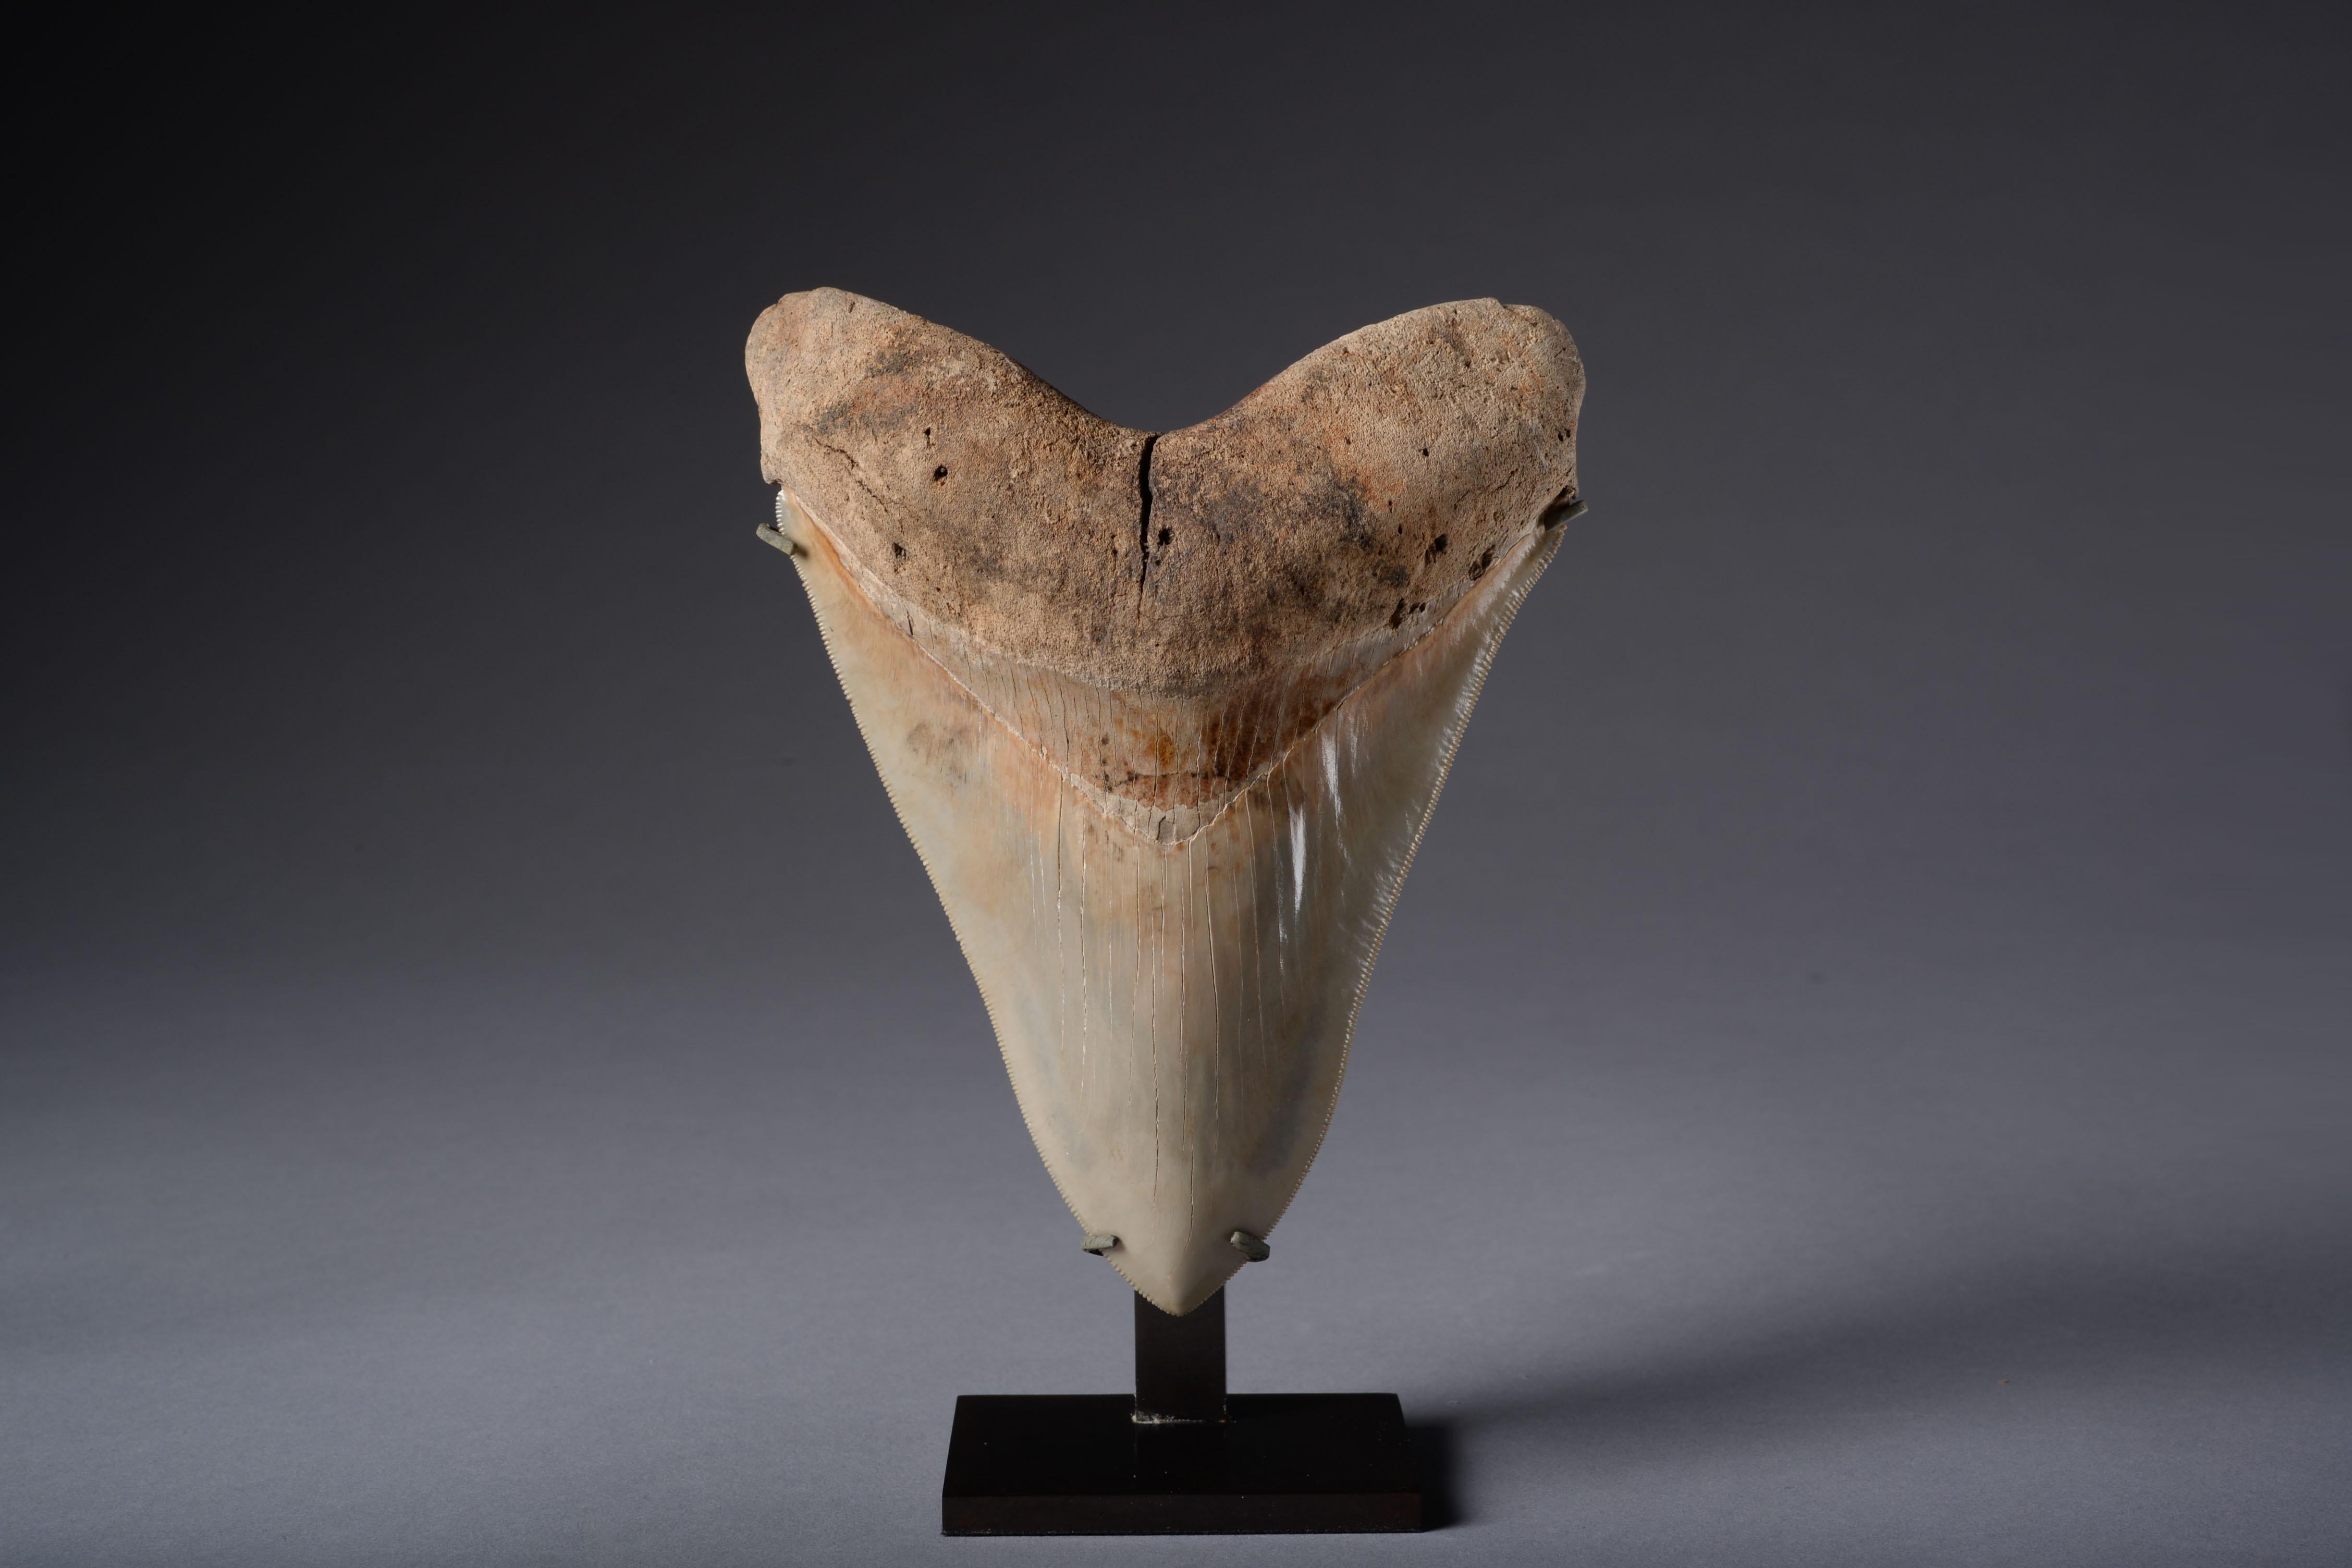 This exceedingly large serrated tooth would have once lined the mouth of a big Megalodon shark (Carcharocles megalodon). It is extremely well preserved, intact with no restorations and has a beautiful, glossy enamel.

The mightiest and most